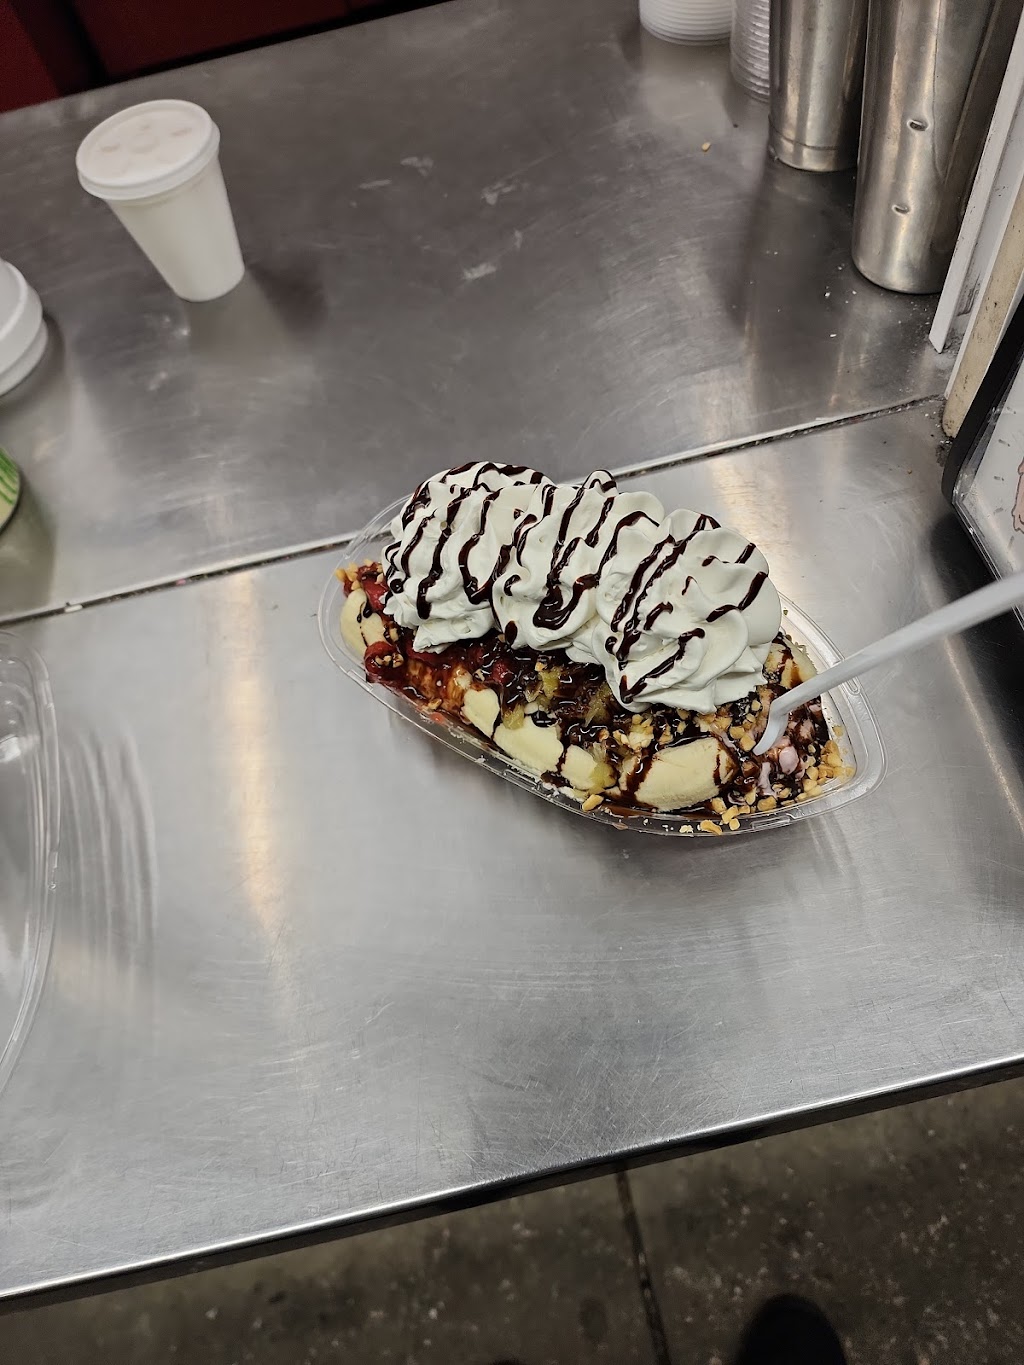 Dairy Delite | 972 Woodbourne Rd, Levittown, PA 19057 | Phone: (215) 547-1636